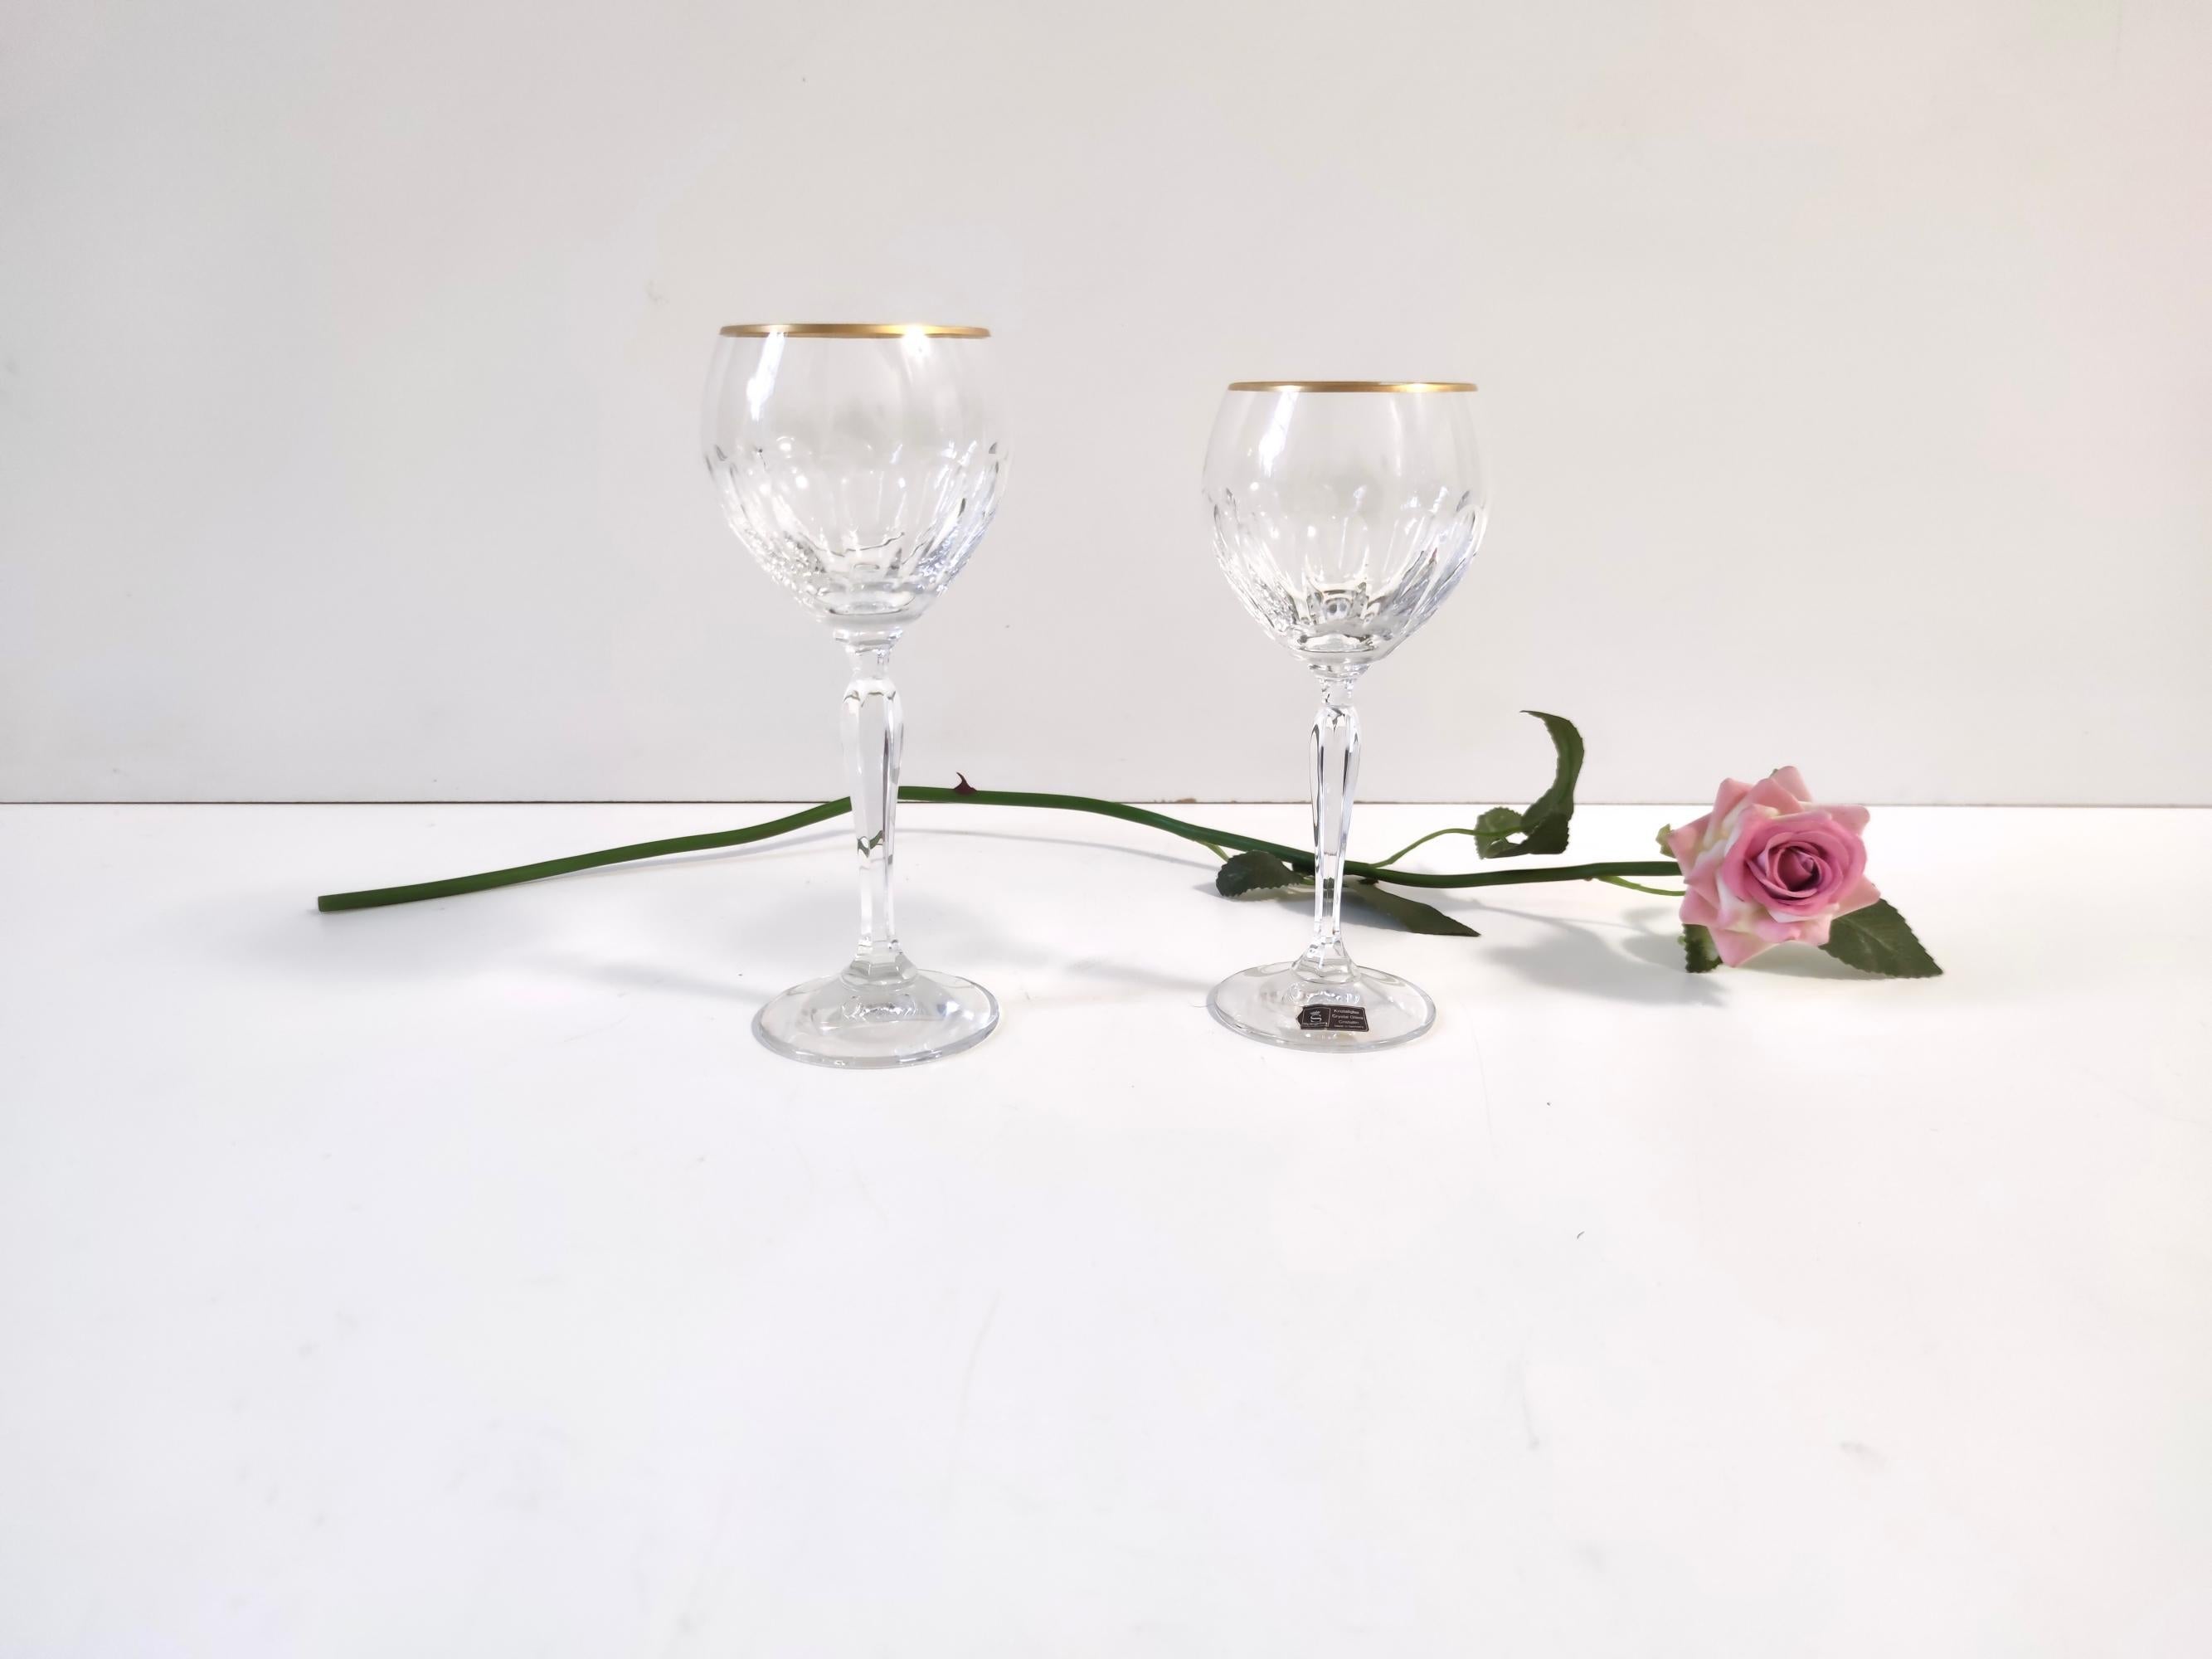 Made in Germany, 1970s. 
This set of twenty-two glasses is made in fine crystal and features a golden rim.
They are produced by Spiegelau, a German company with a centuries-old experience.
It is a vintage set, therefore it might show slight traces